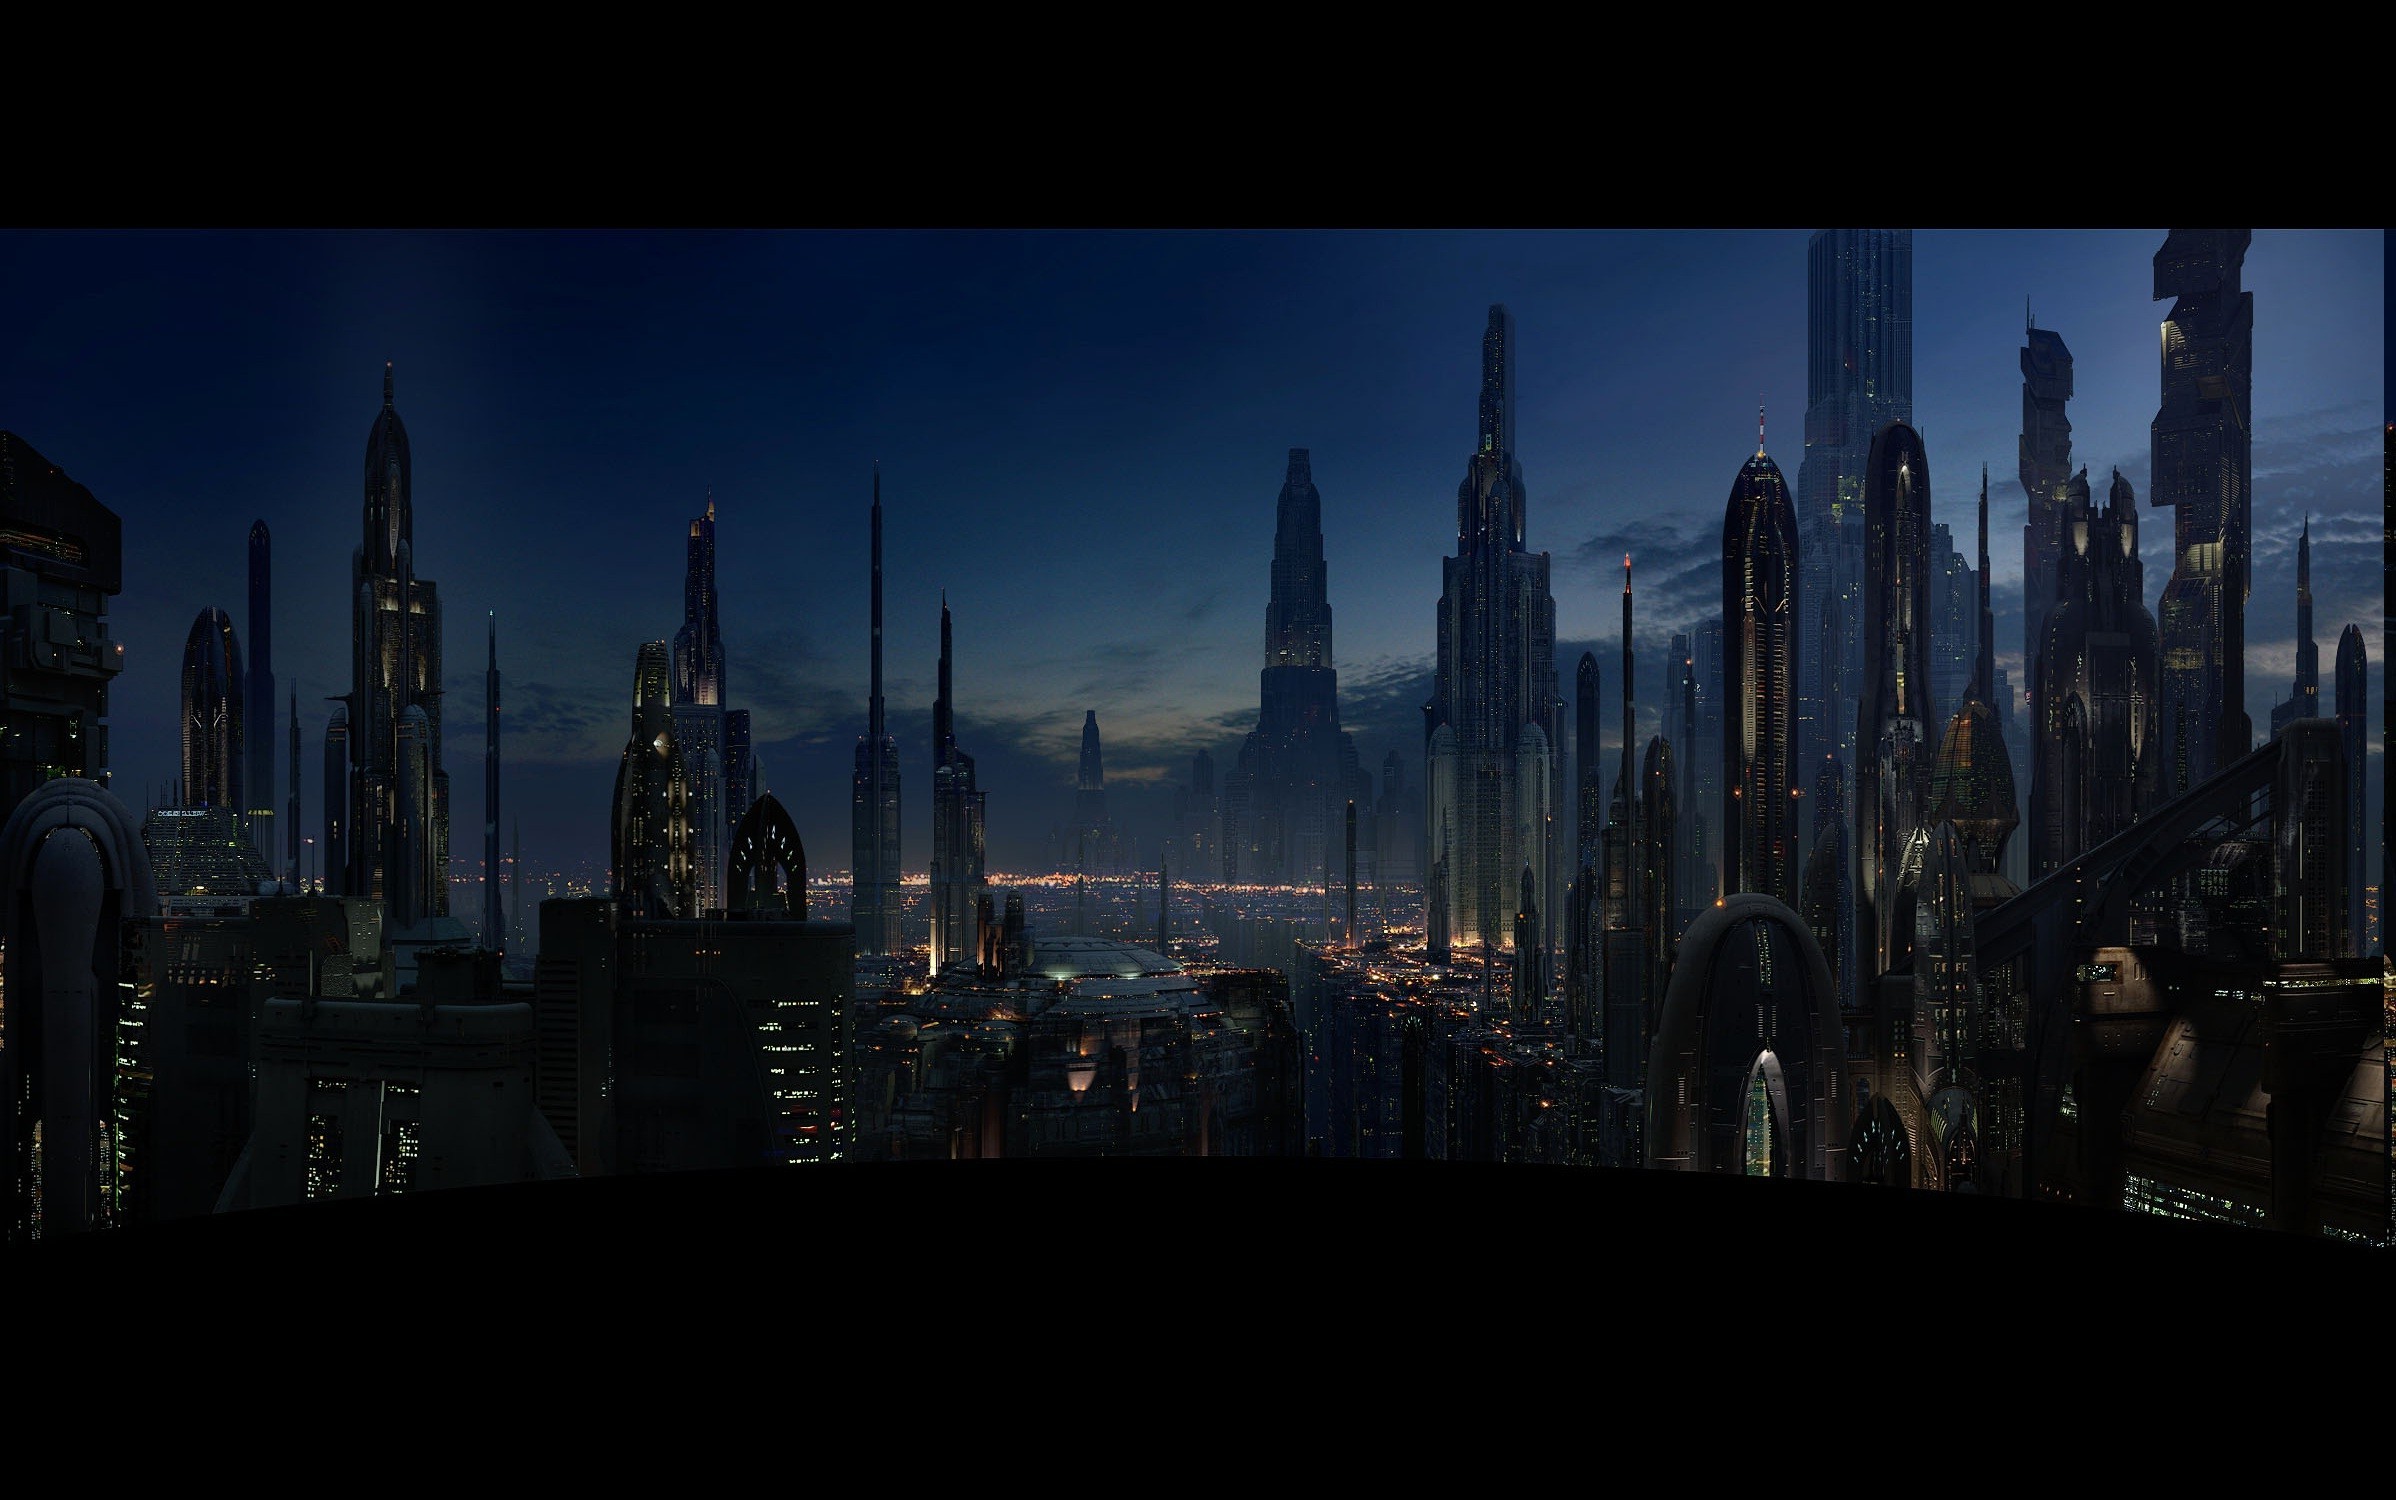 star wars scenery pictures